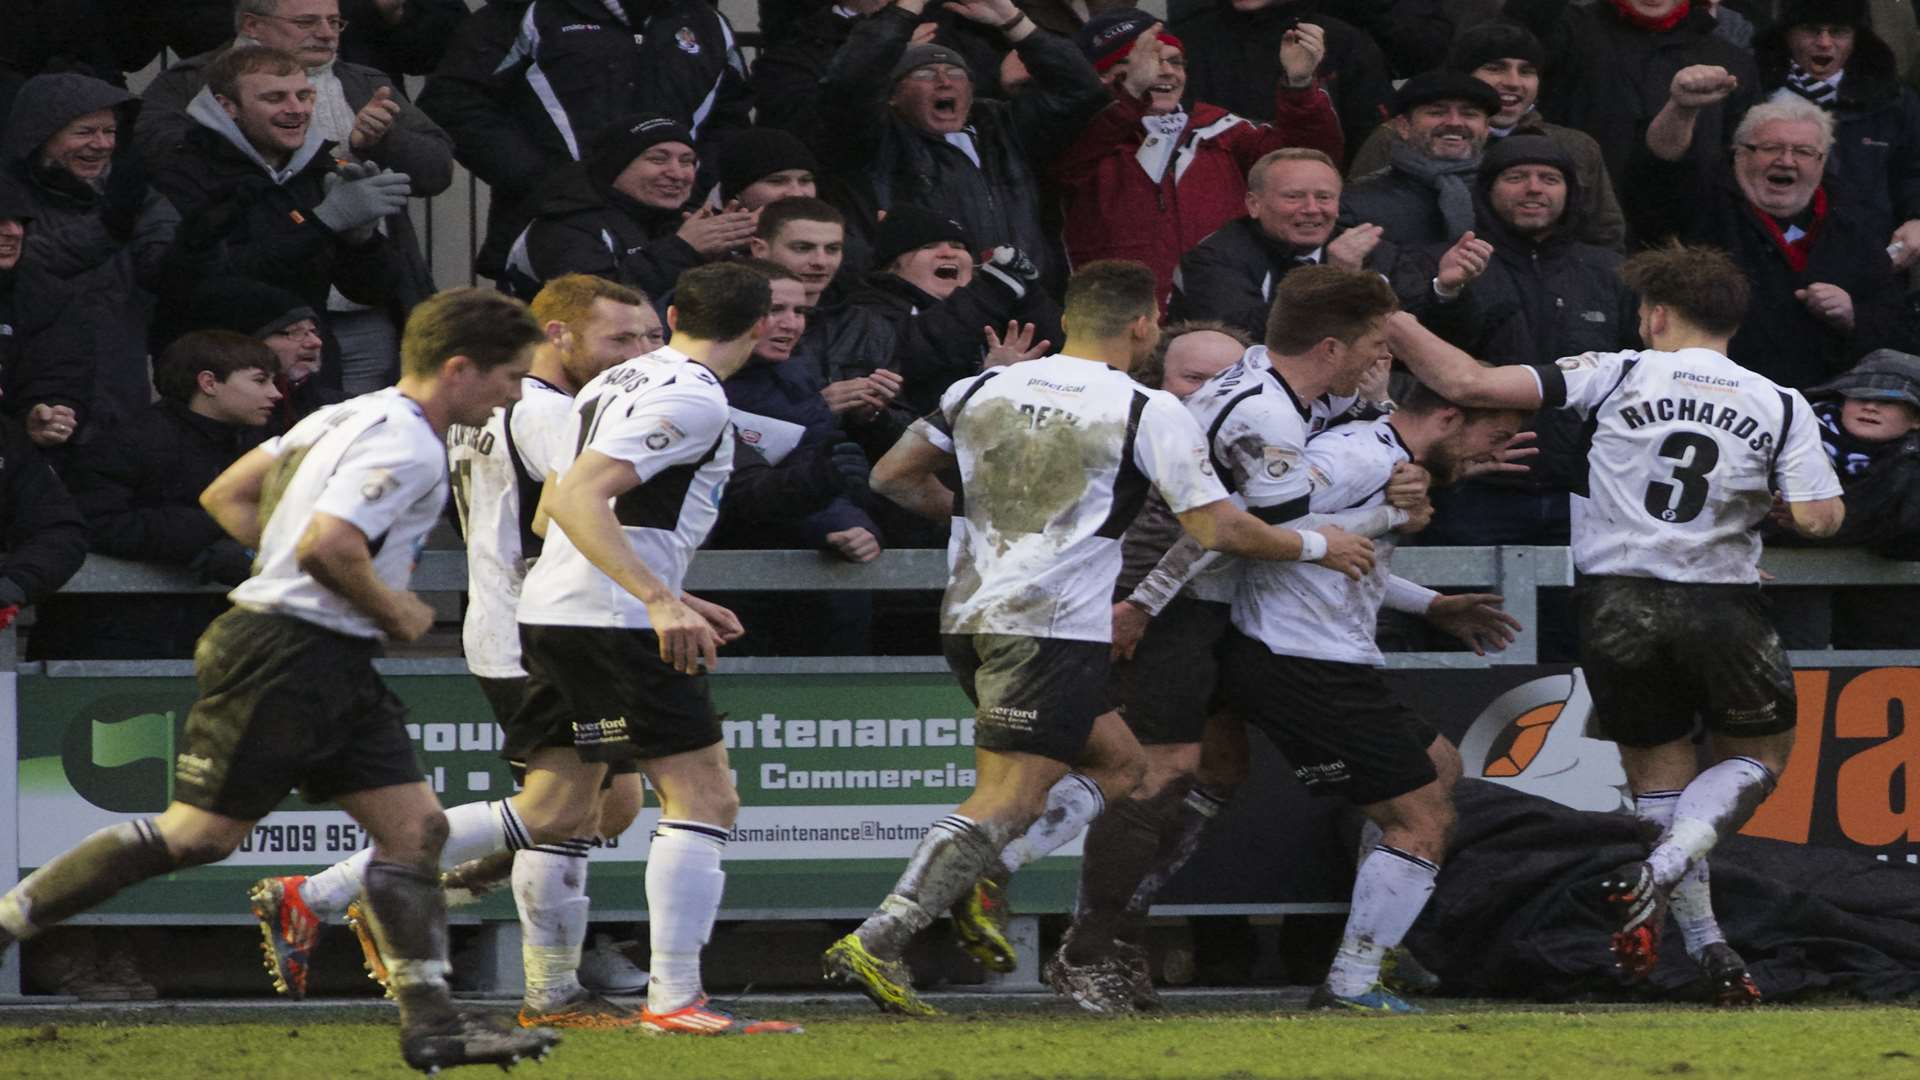 Ryan Hayes is mobbed by his Dartford team-mates after scoring to make it 2-2 Picture: Andy Payton